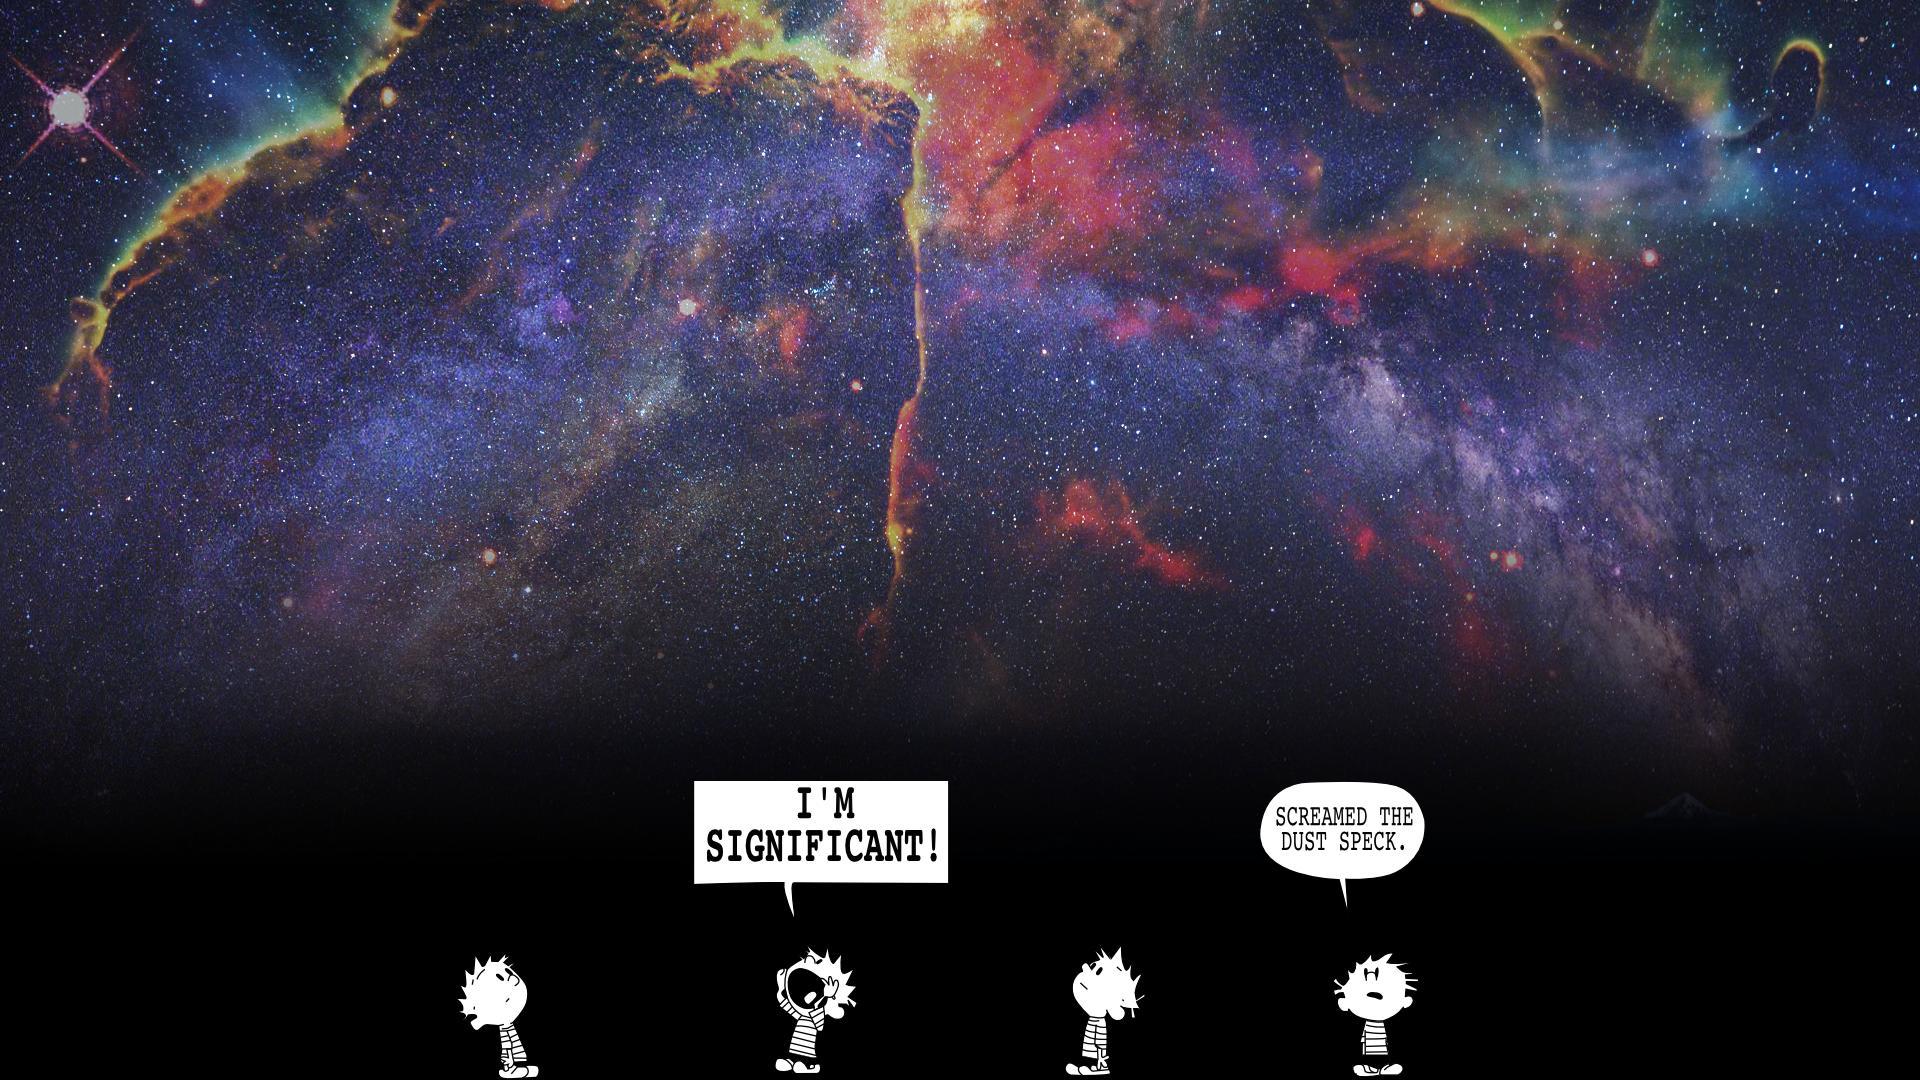 This is my favorite wallpaper. Calvin and Hobbes space theme